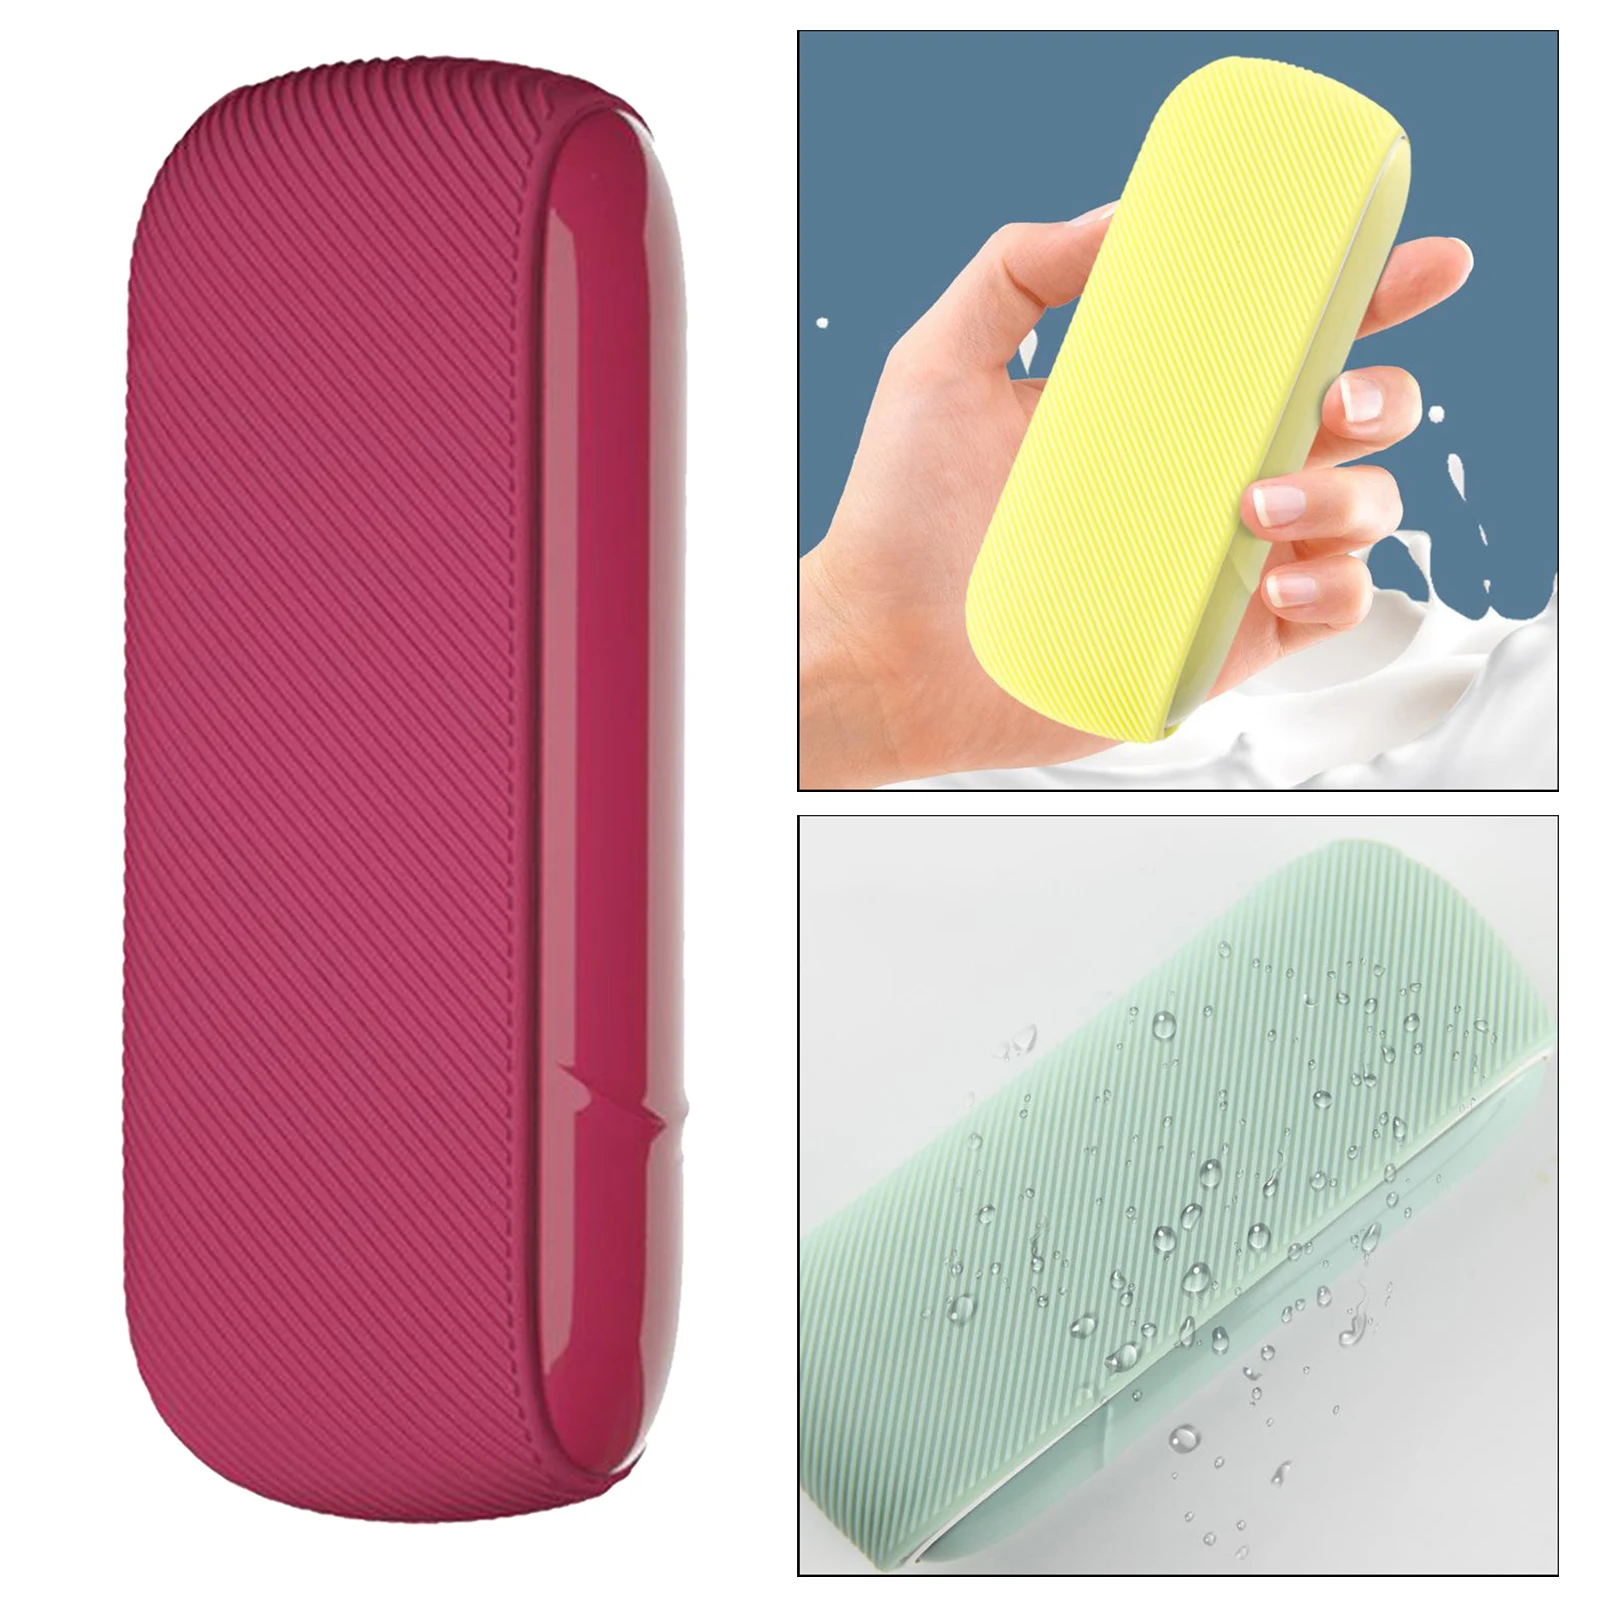 Twill Durable Soft Texture Case for IQOS 3.0 Protective Silicone Rubber Sleeve Cover Shield Wrap 